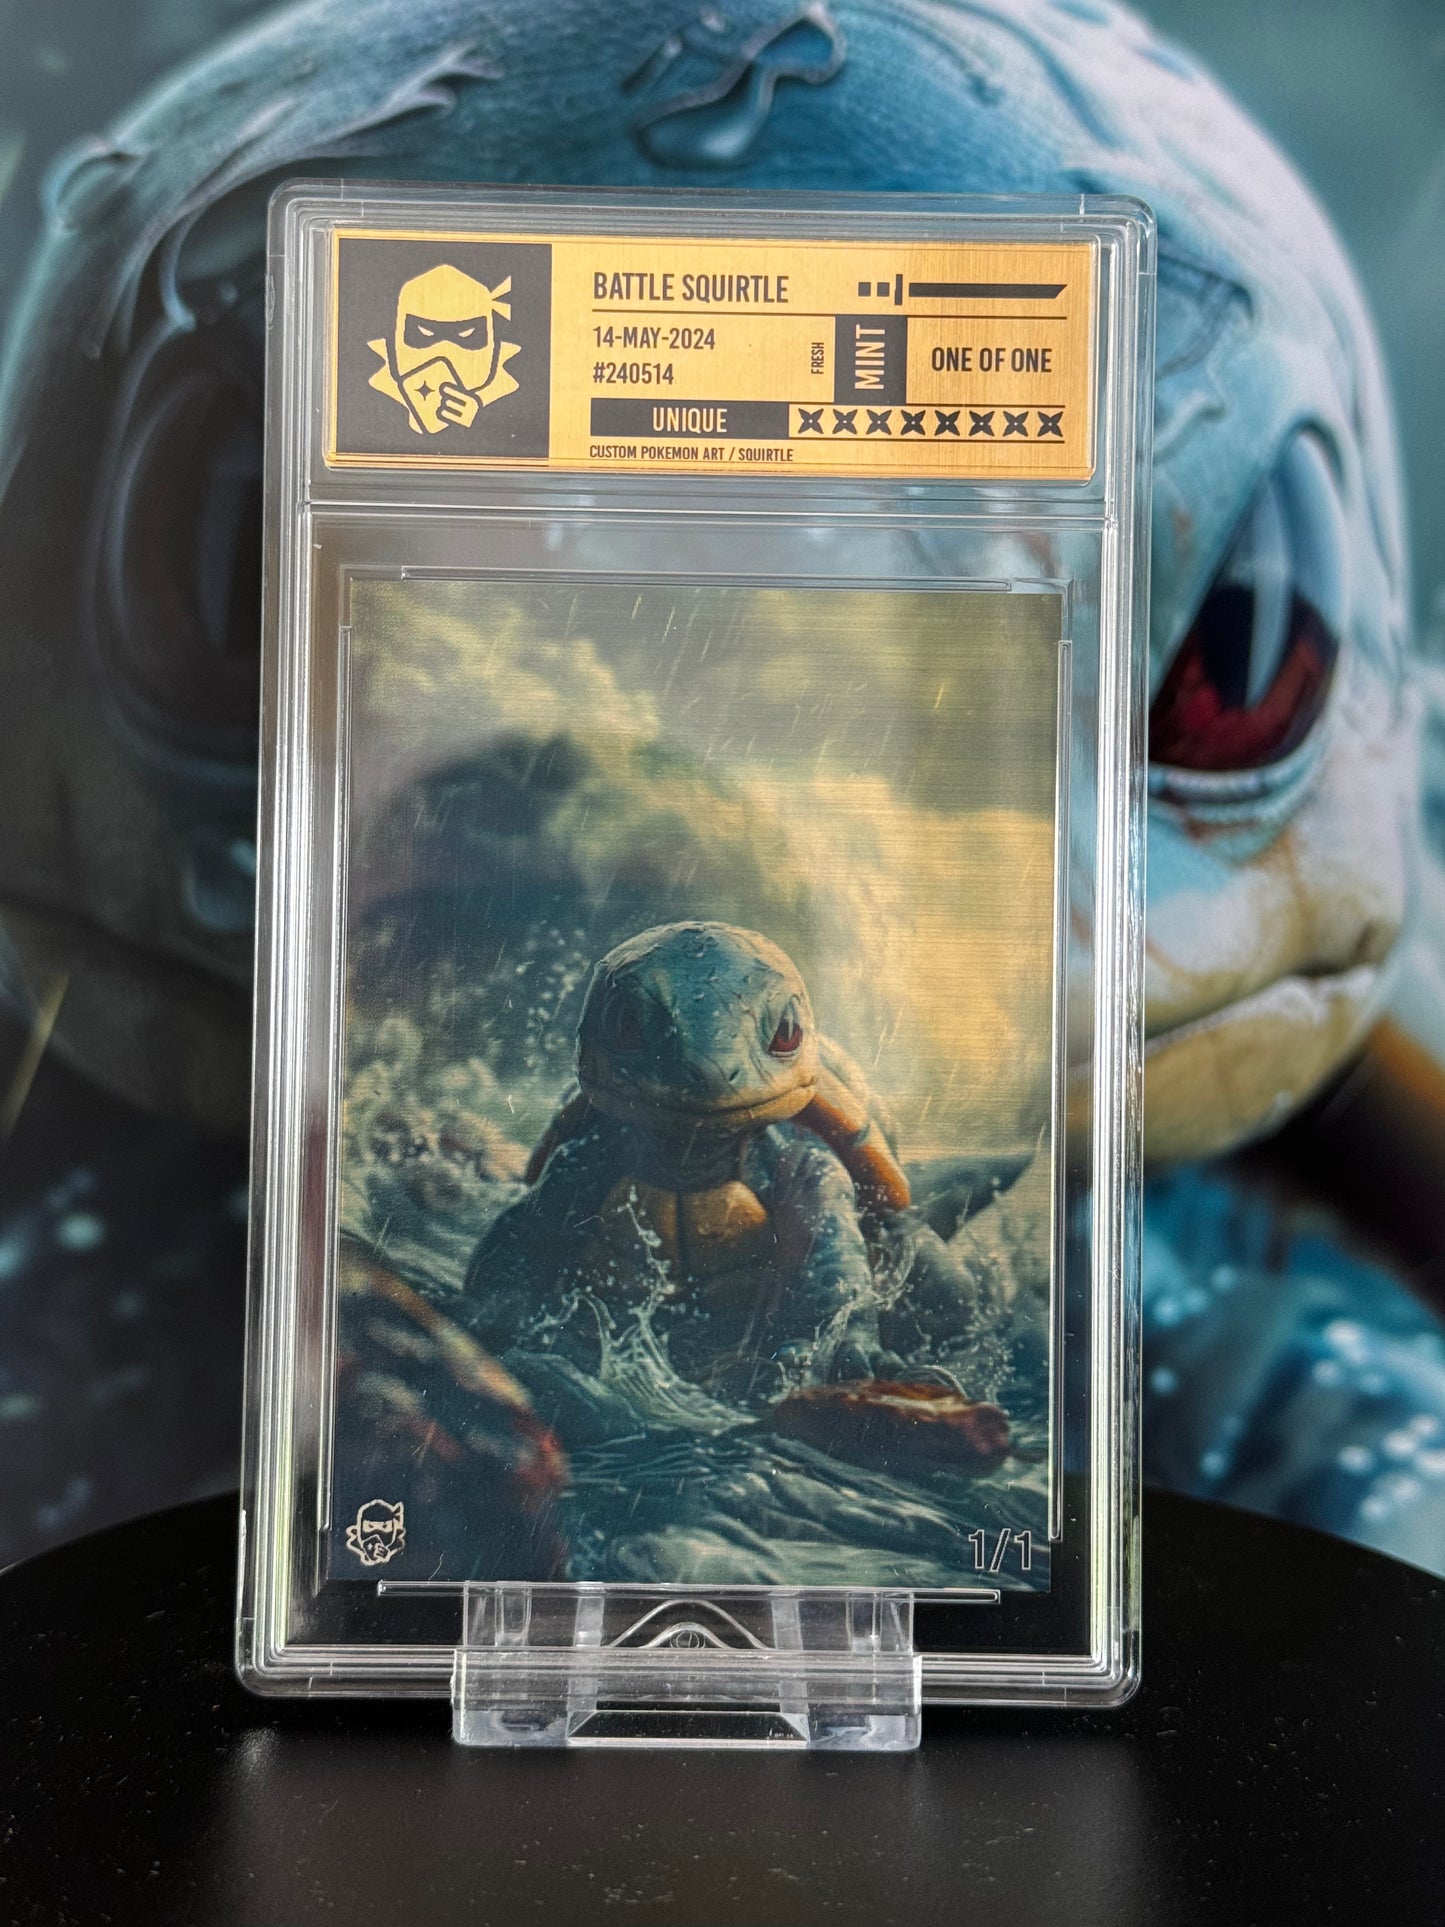 Battle Squirtle /1 Brushed Gold Label